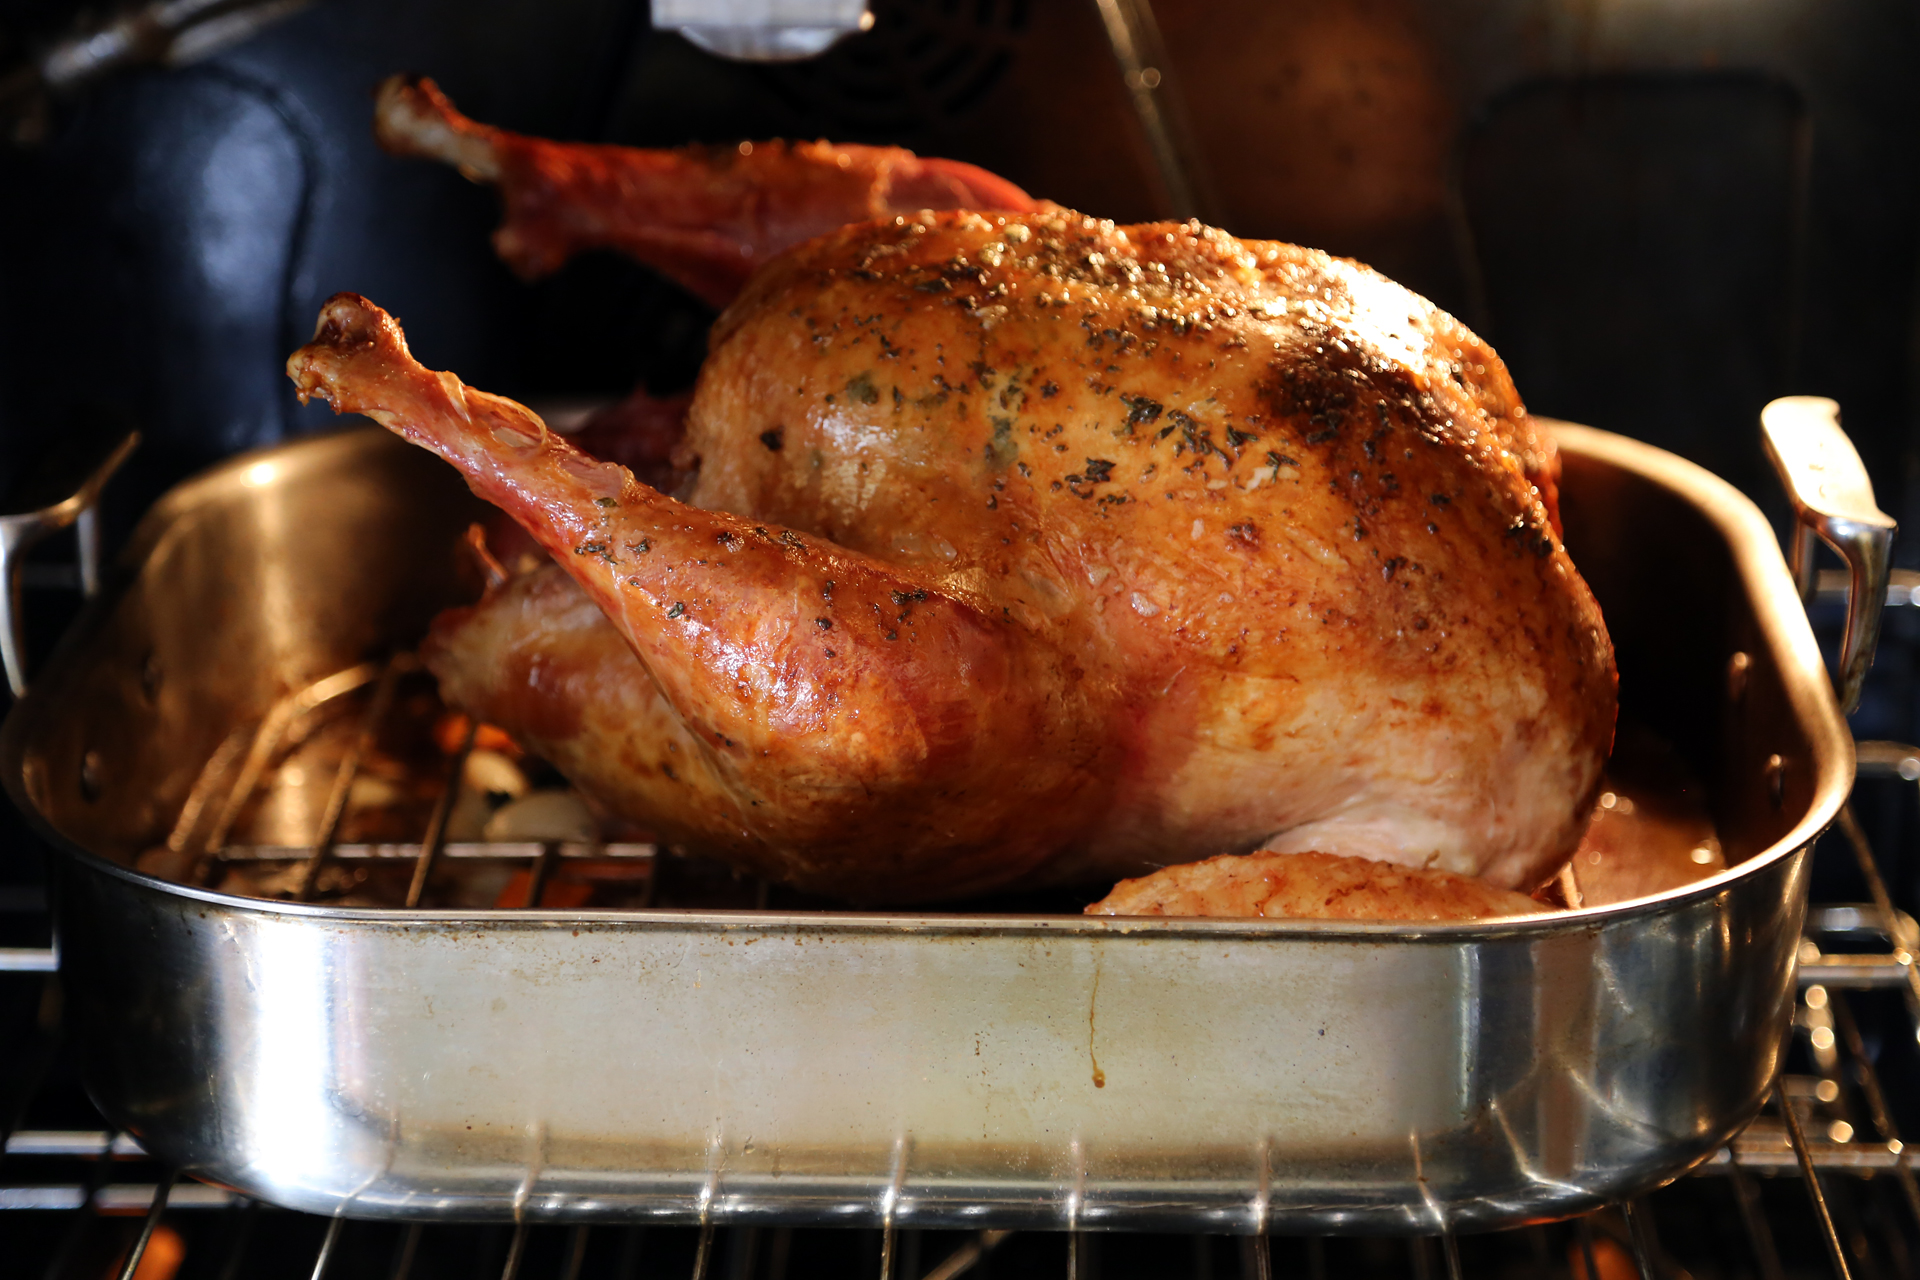 Remove the turkey from the oven and carefully turn the bird breast side up. Continue to roast until the temperature reads 165F in the thickest part of the breast away from the bone or 170F in the thickest part of the thigh away from the bone.